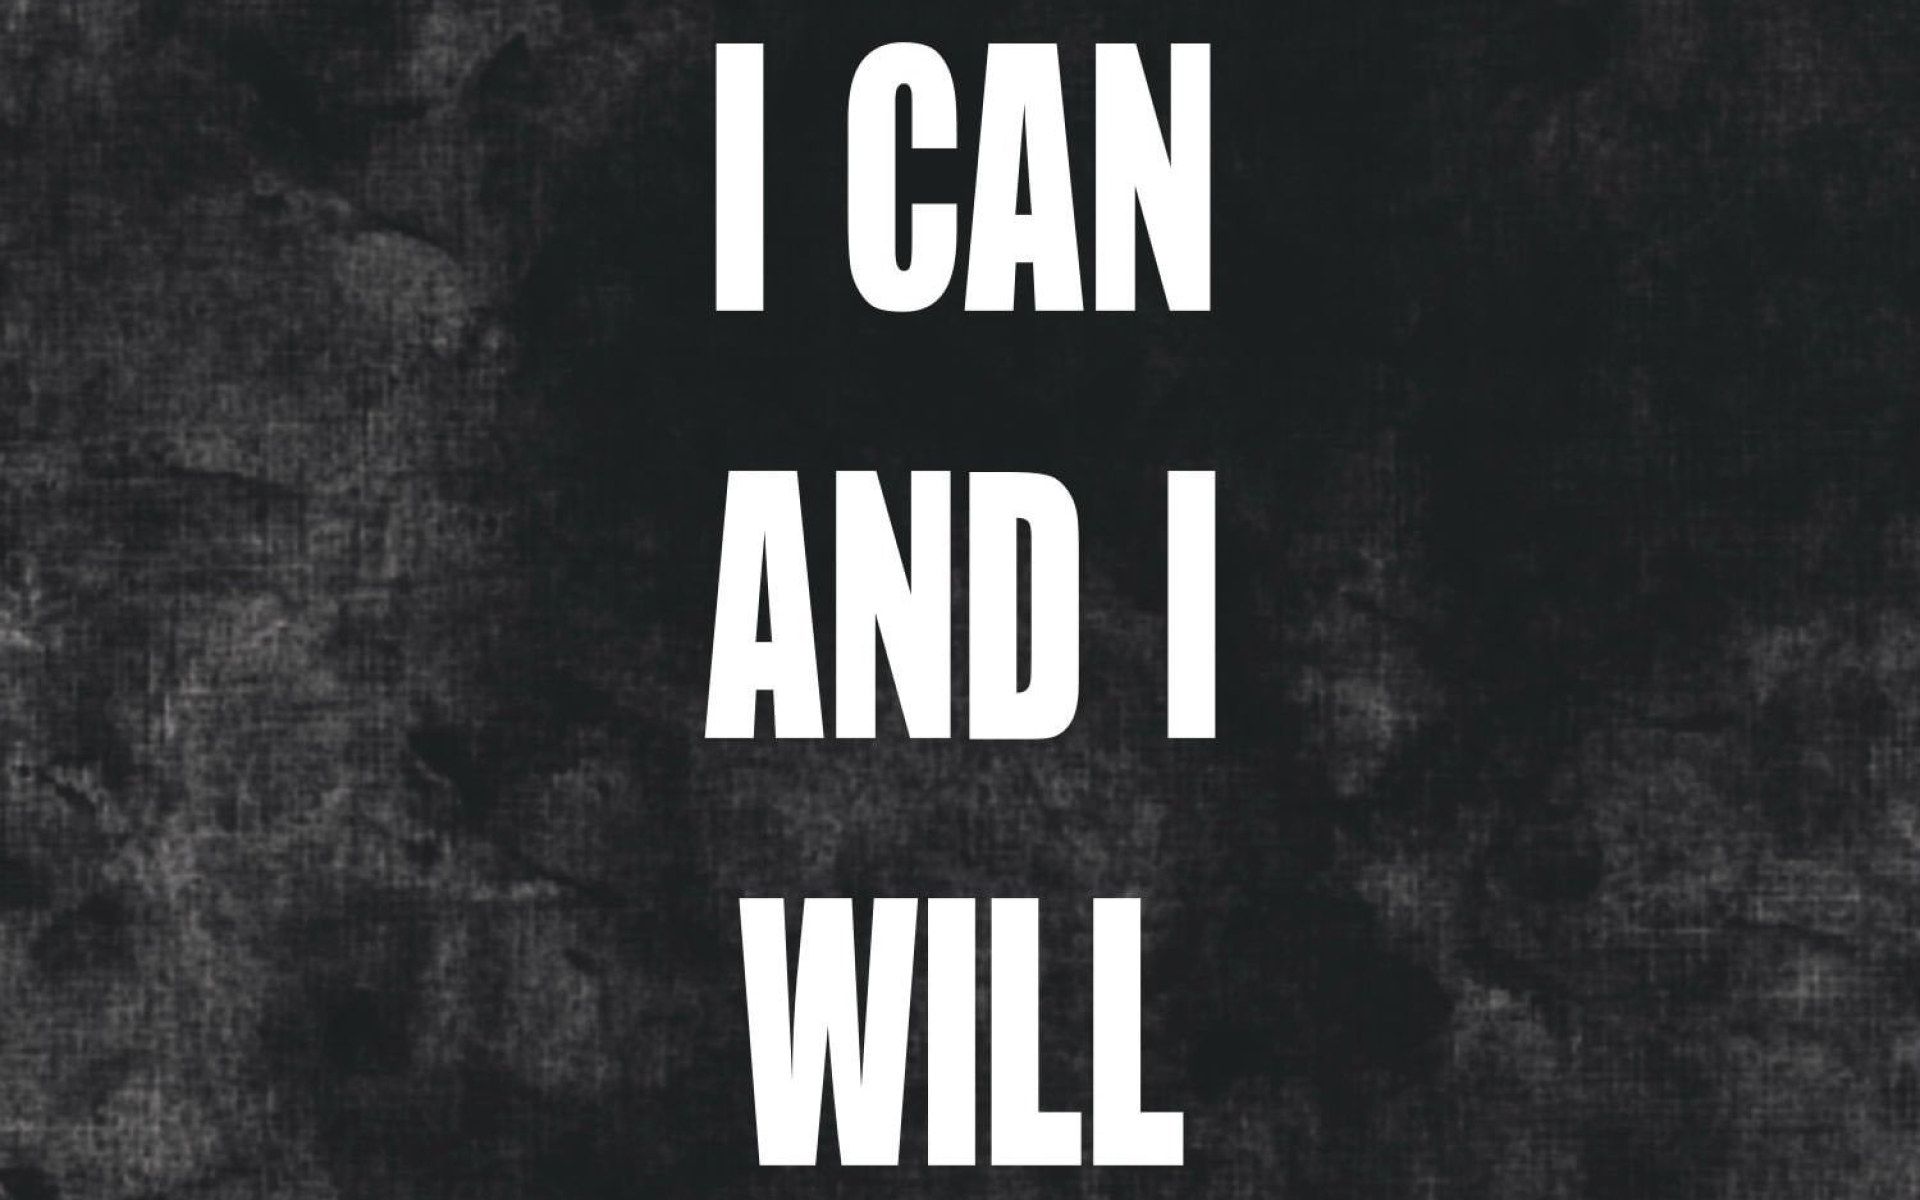 I can and i will wallpaper, inspirational, motivational, quote • Wallpaper For You HD Wallpaper For Desktop & Mobile